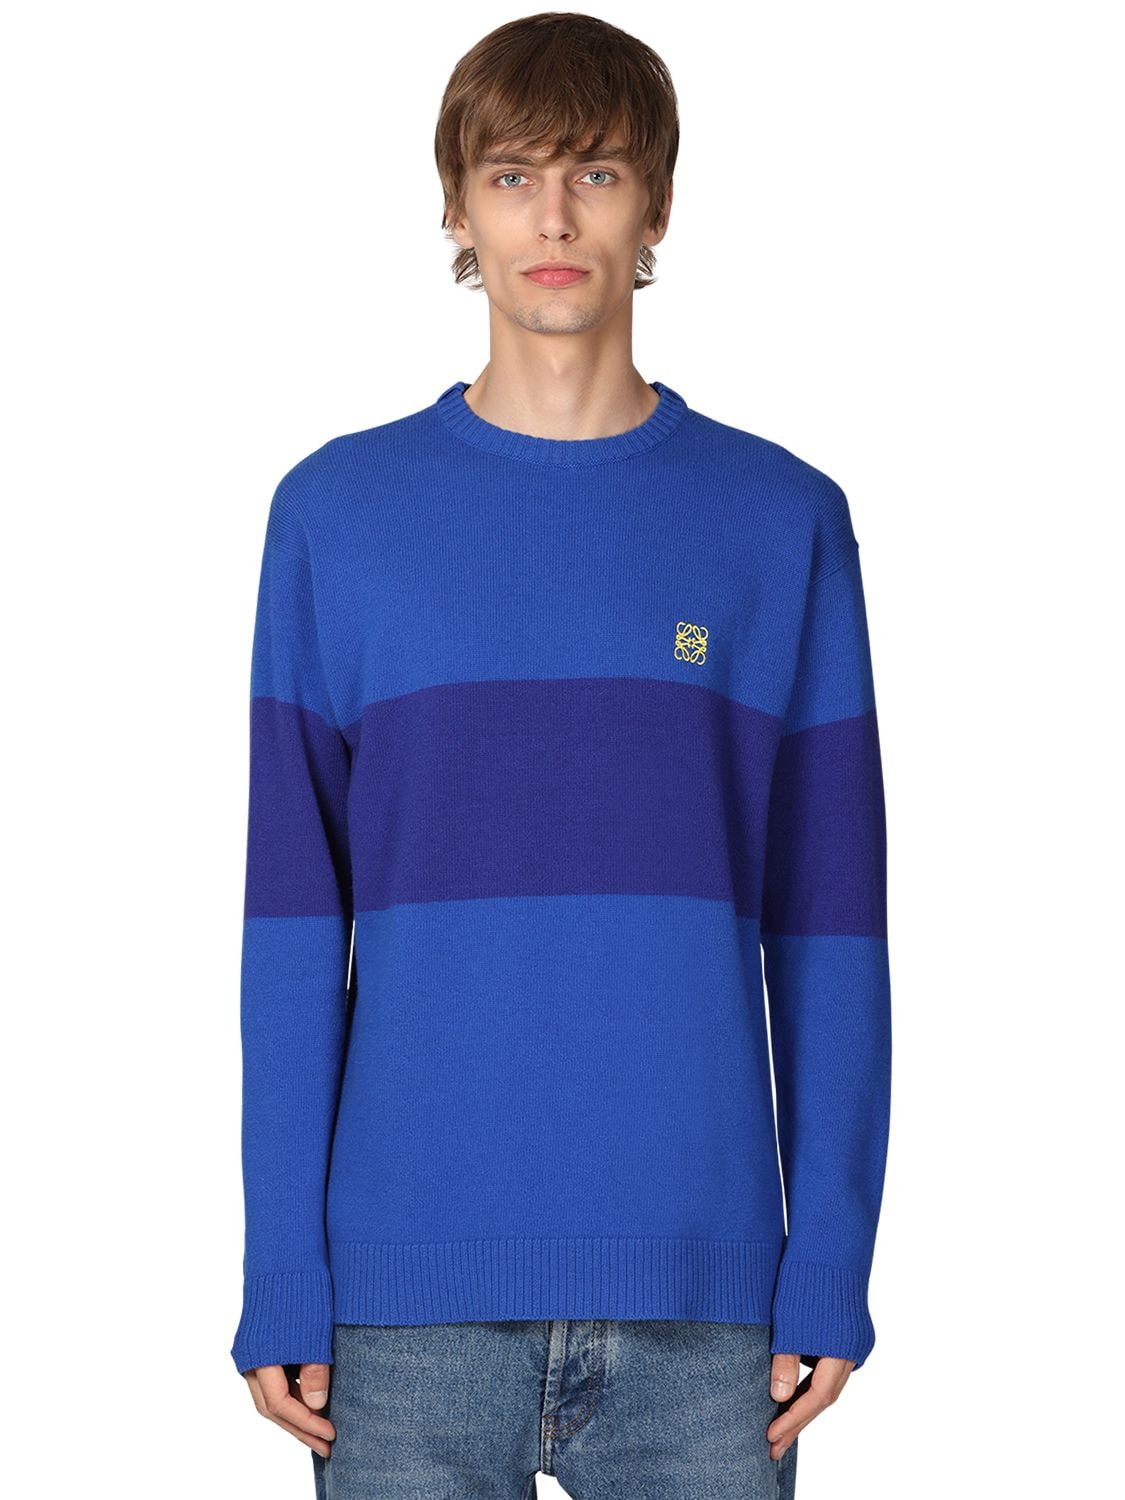 Loewe Anagram Embroidered Stripe Wool Sweater In 5931 Blue/e | ModeSens